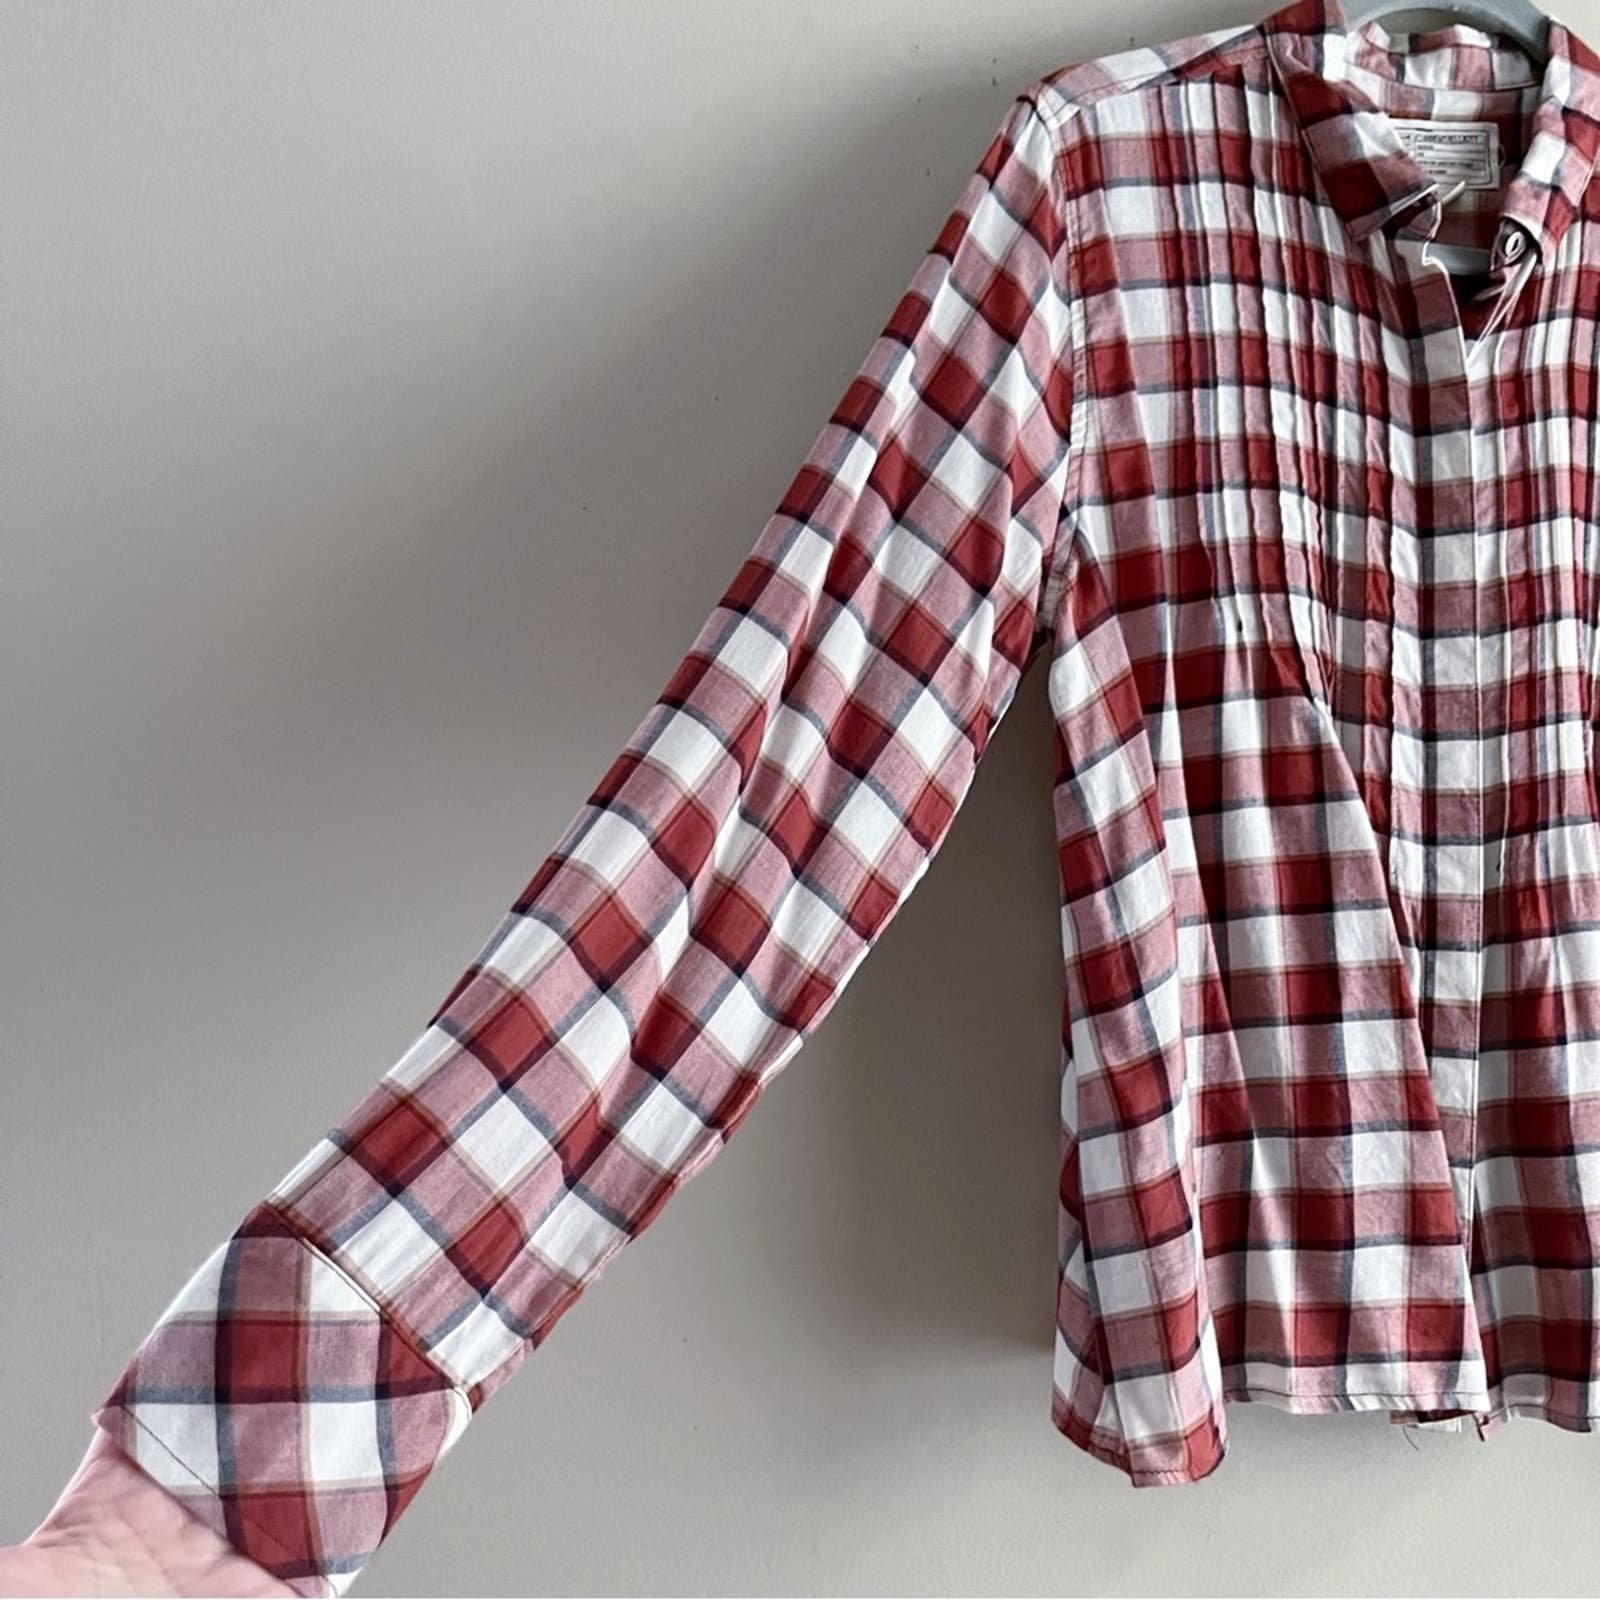 Current/Elliott Lucy Tuck Button Front Blouse in Danika Red Plaid, Size 2 FsBmnizAW